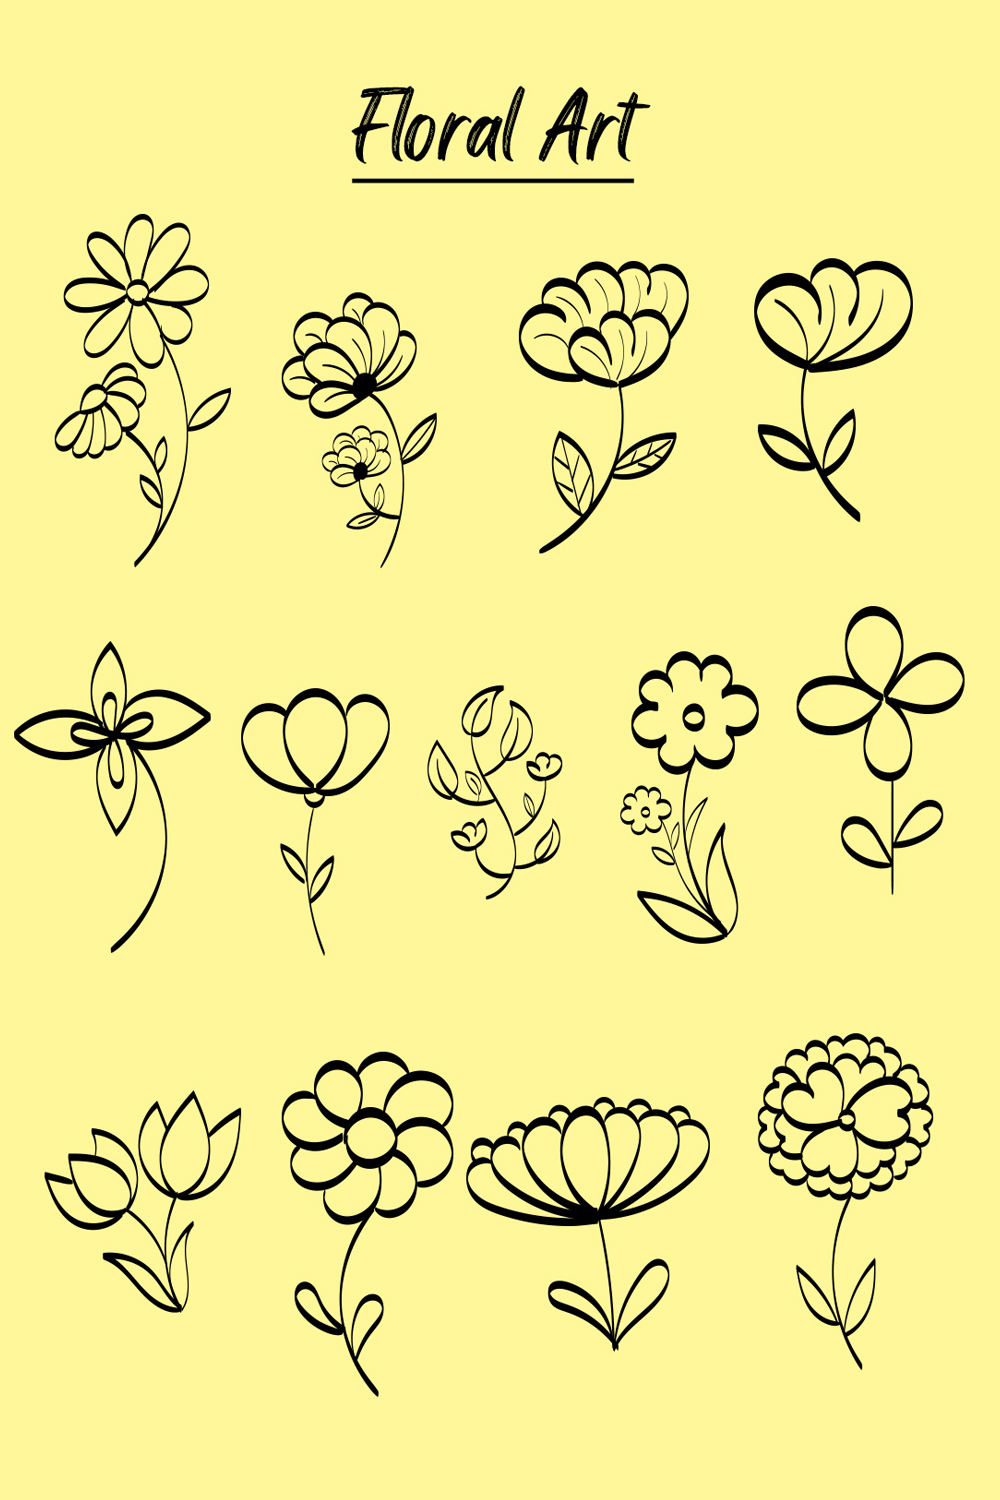 Floral Drawing Art with Line-art Pinterest image.